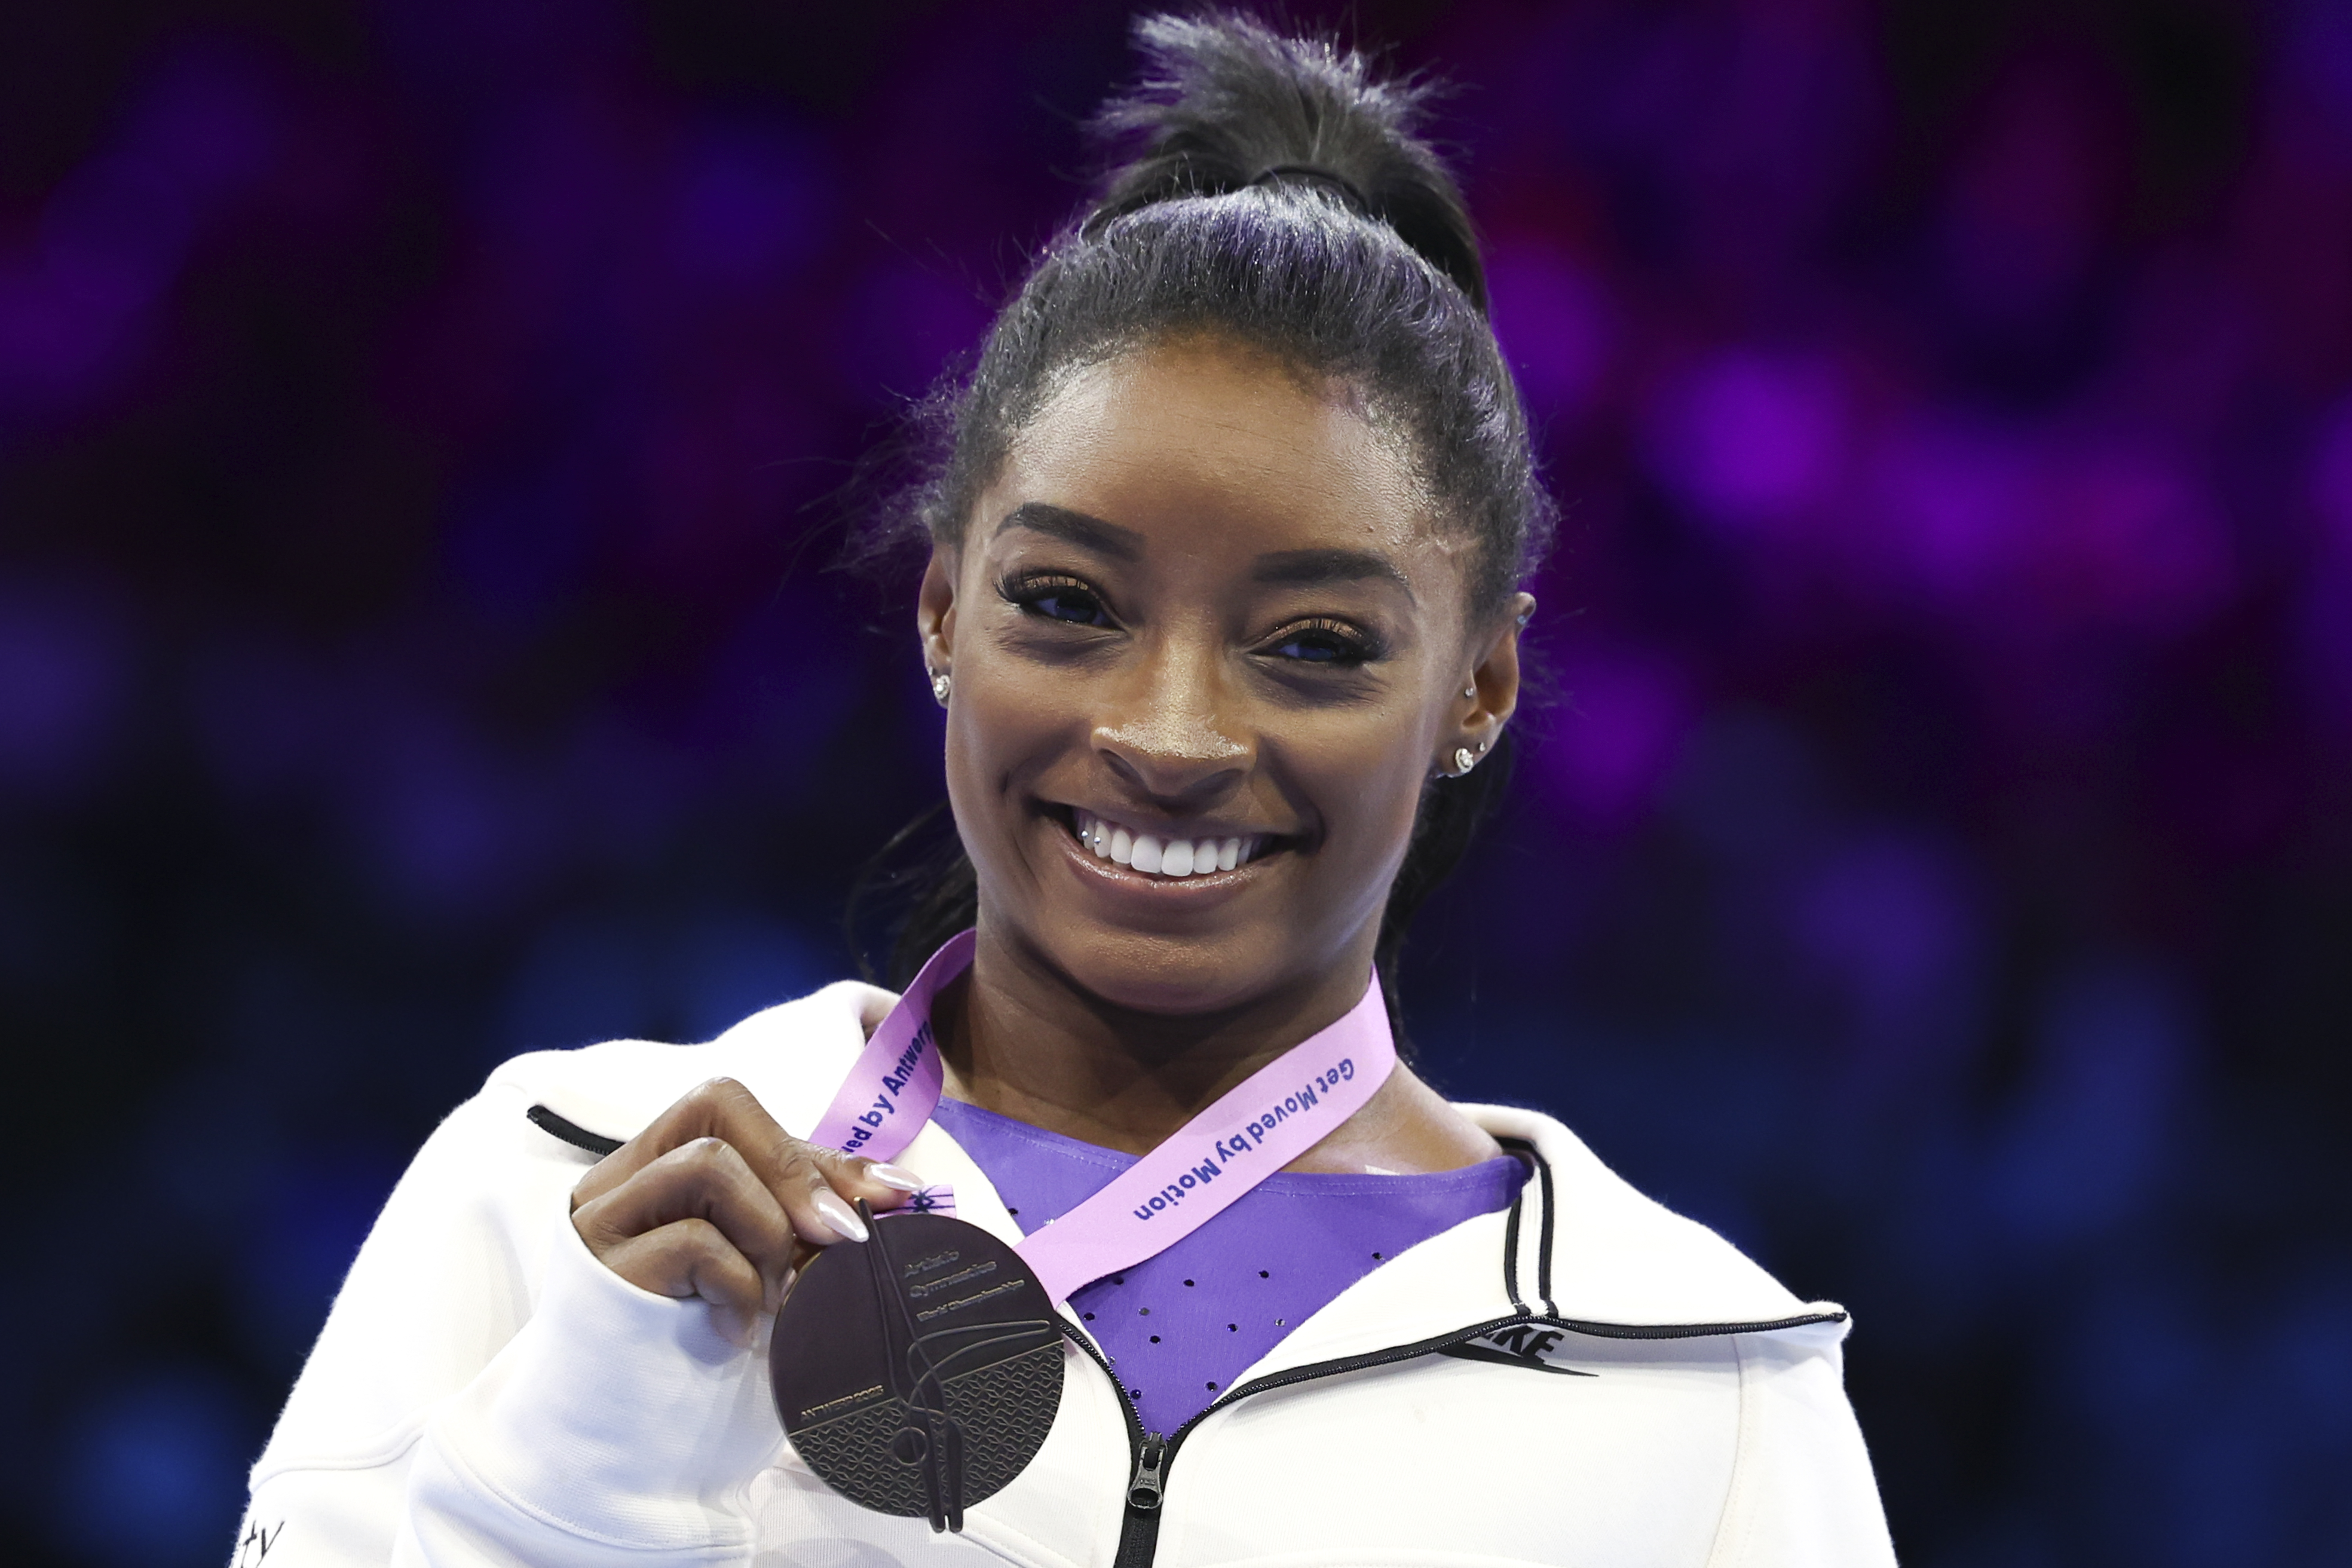 What Should Fans Expect From the Next Phase of Simone Biles's Career?